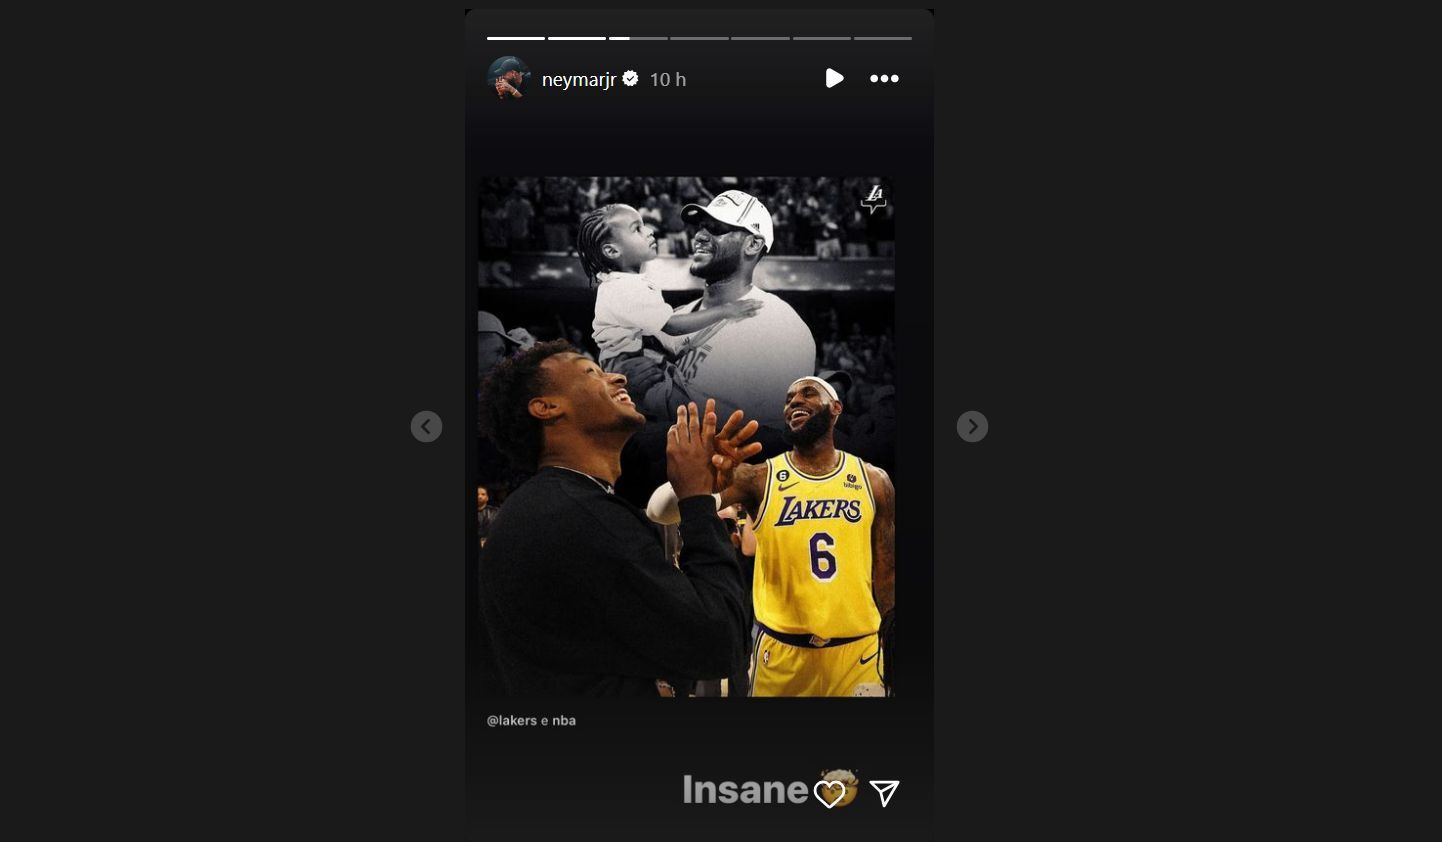 Neymar reacts to LeBron James and his son Bronny potentially playing together for the LA Lakers next season.